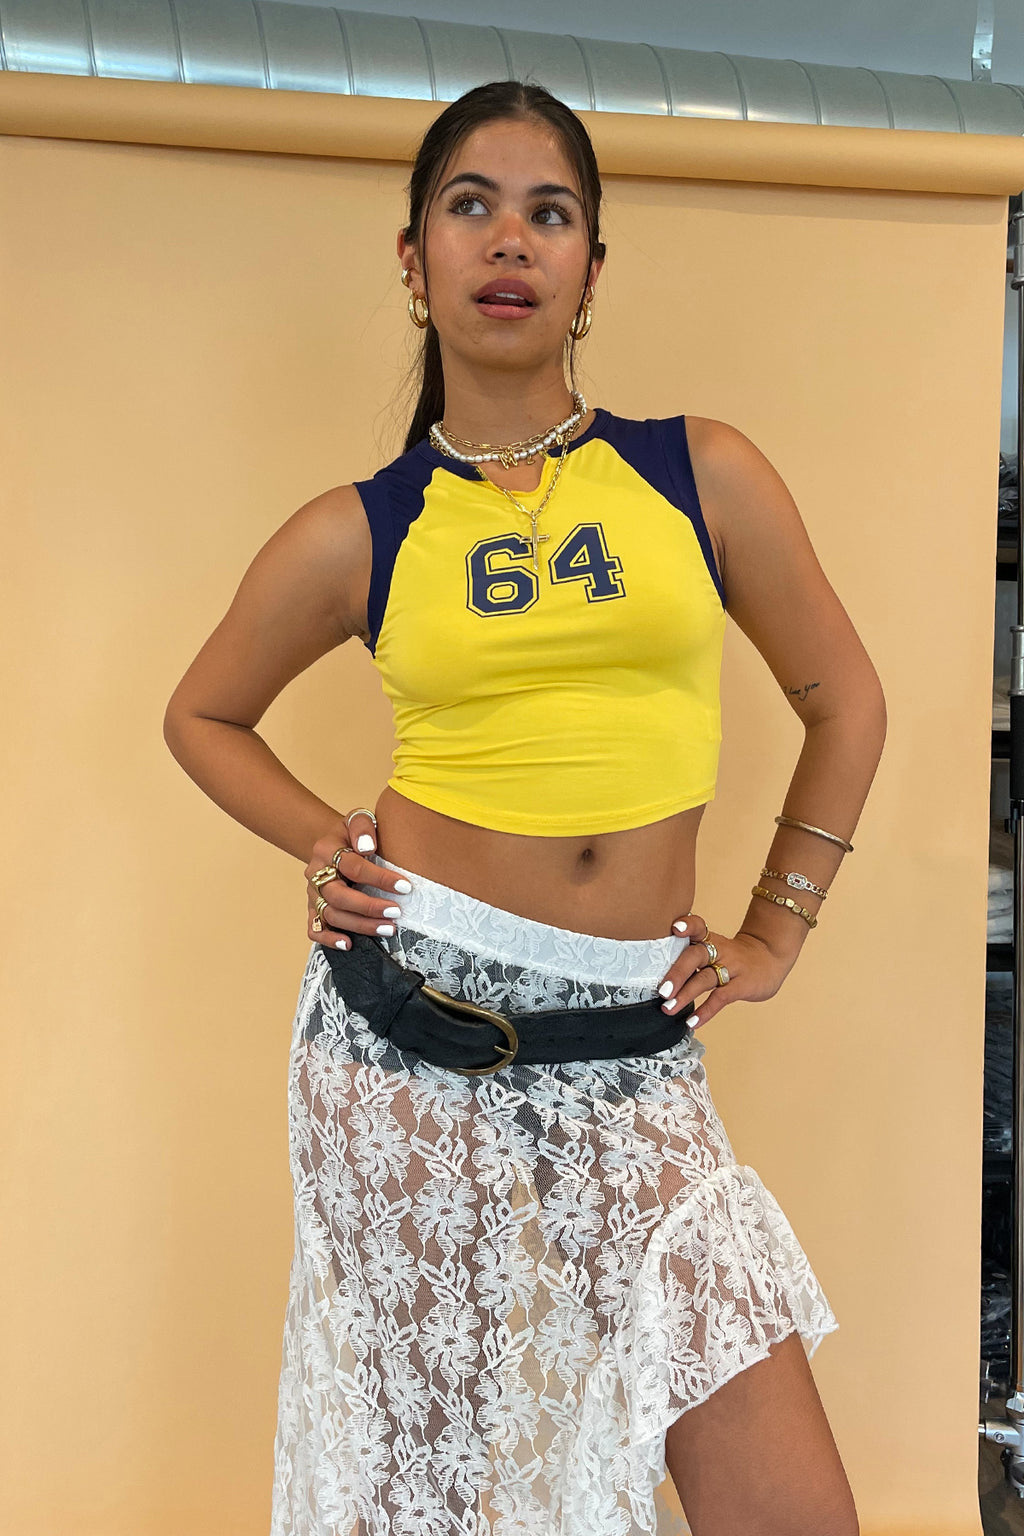 64 Yellow and Navy Graphic Top